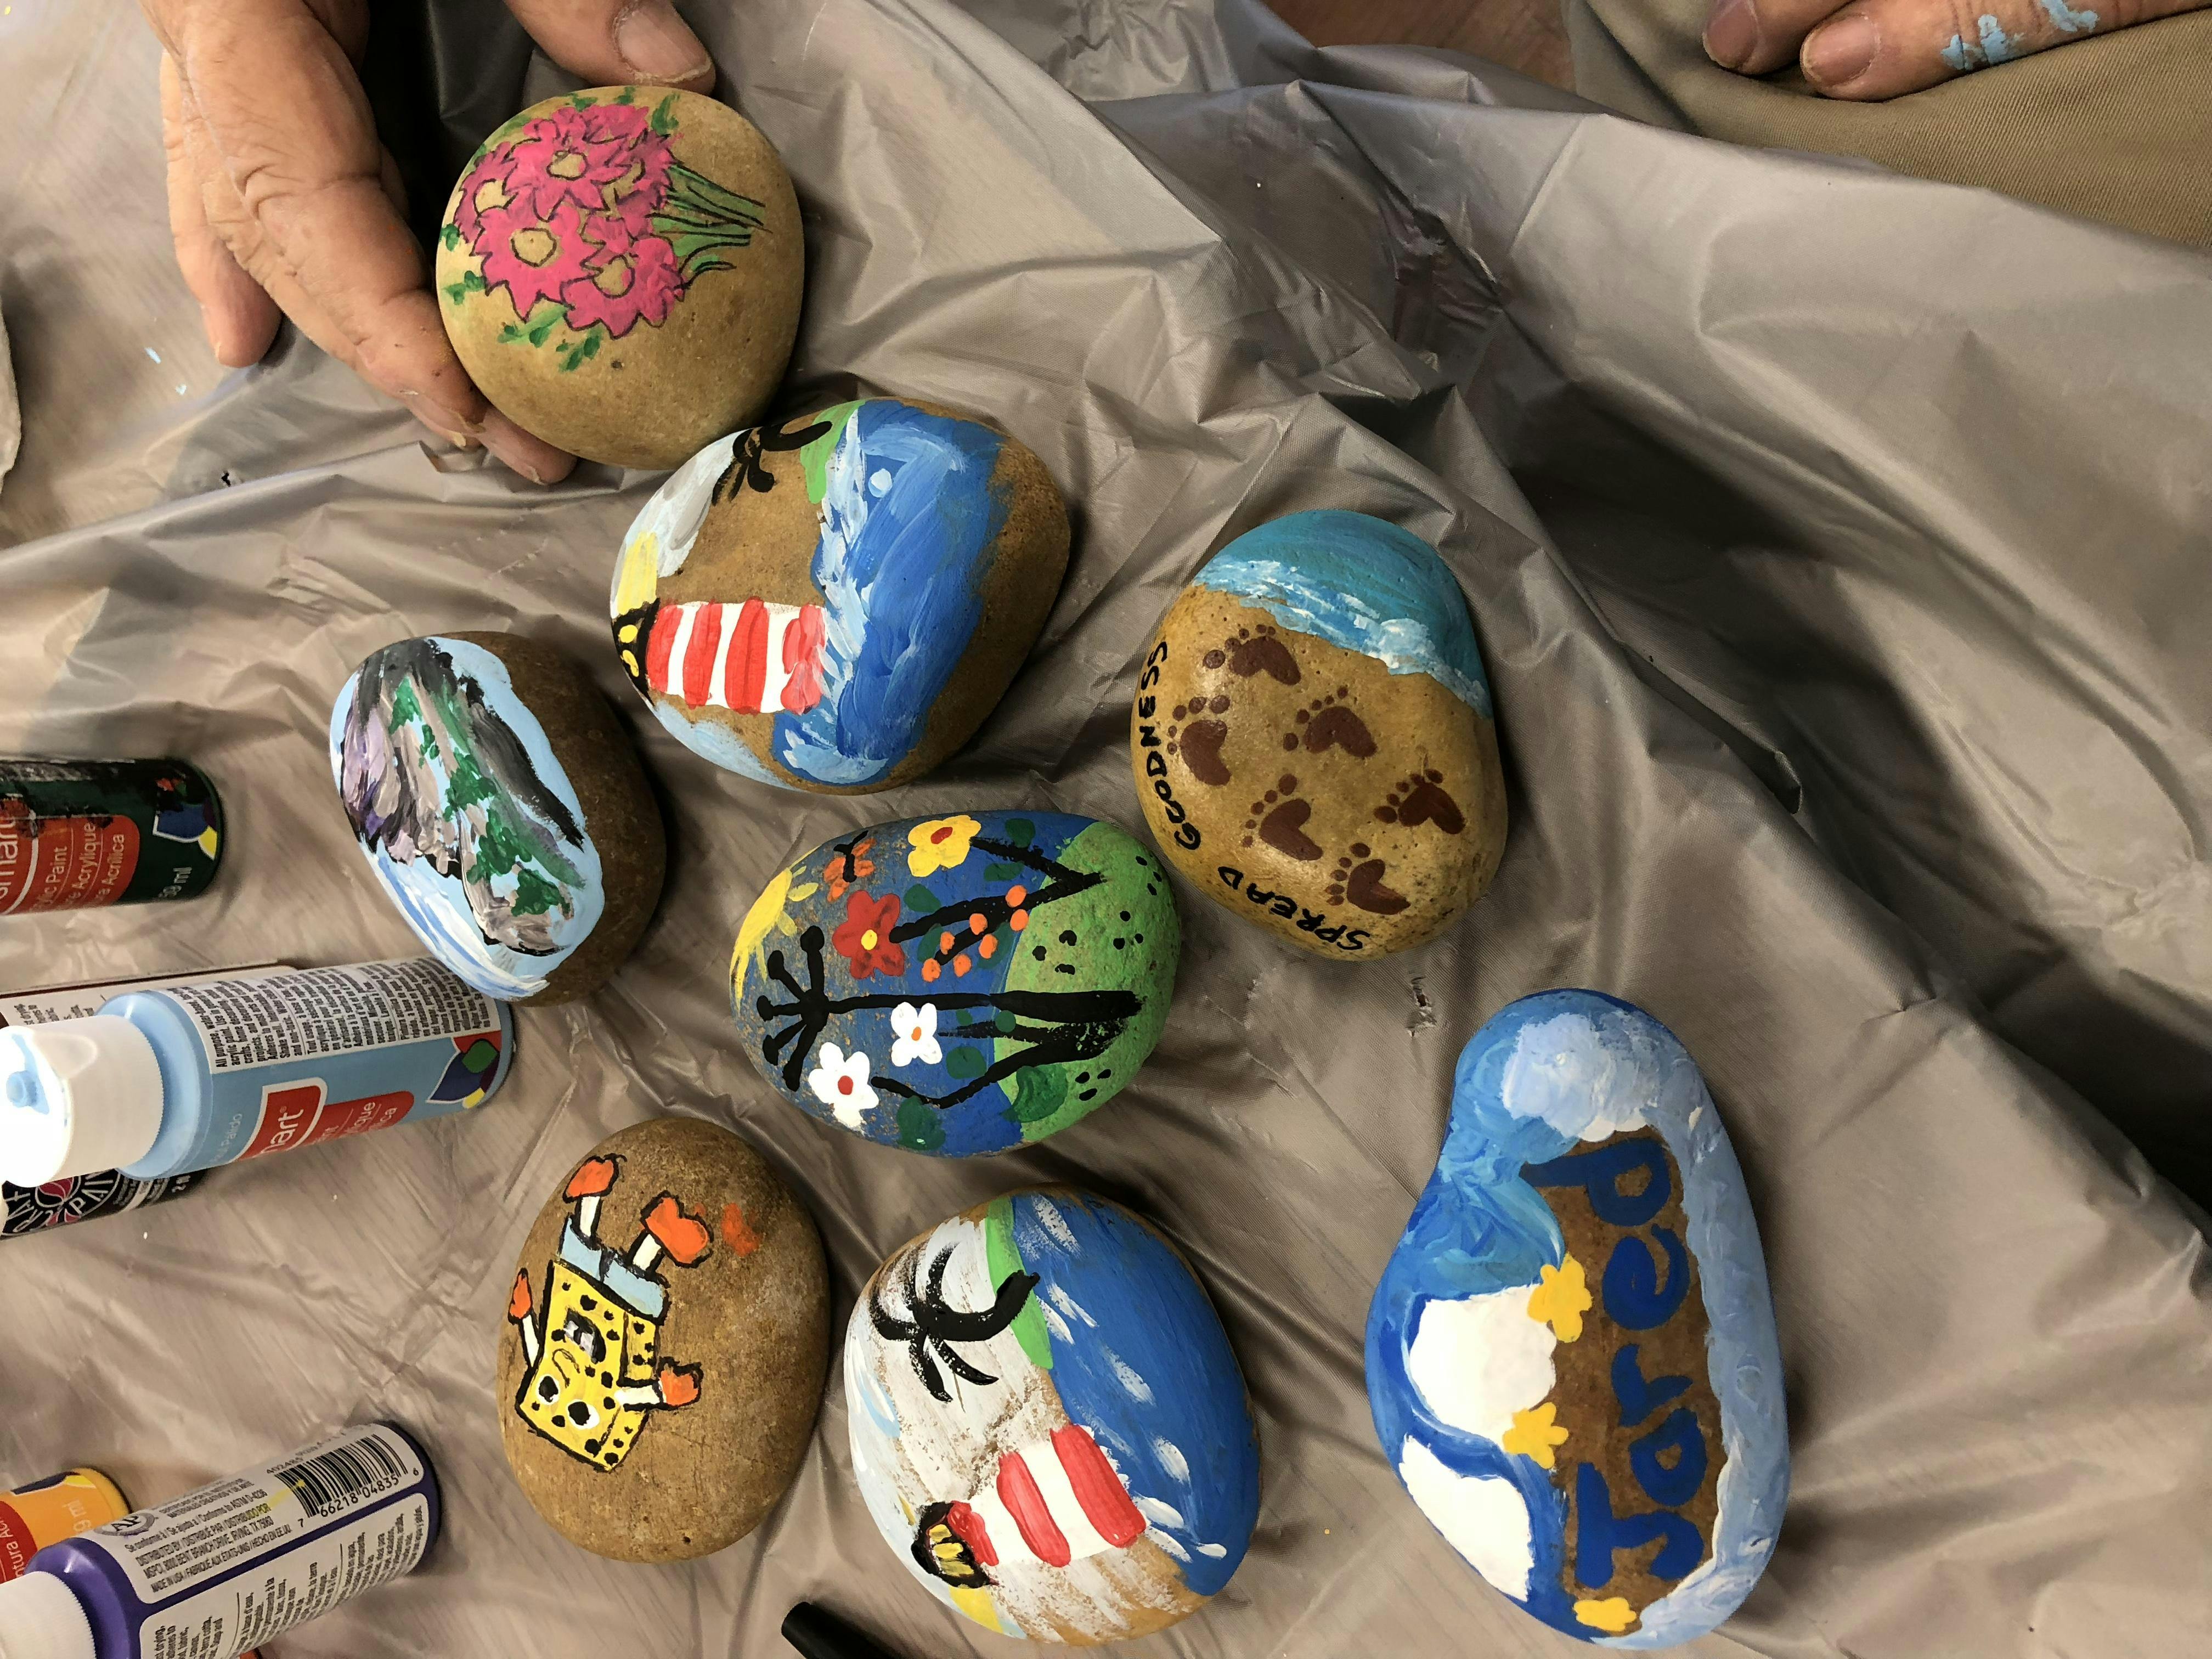 Self Care Sunday Live - Stress Reduction/Rock Painting